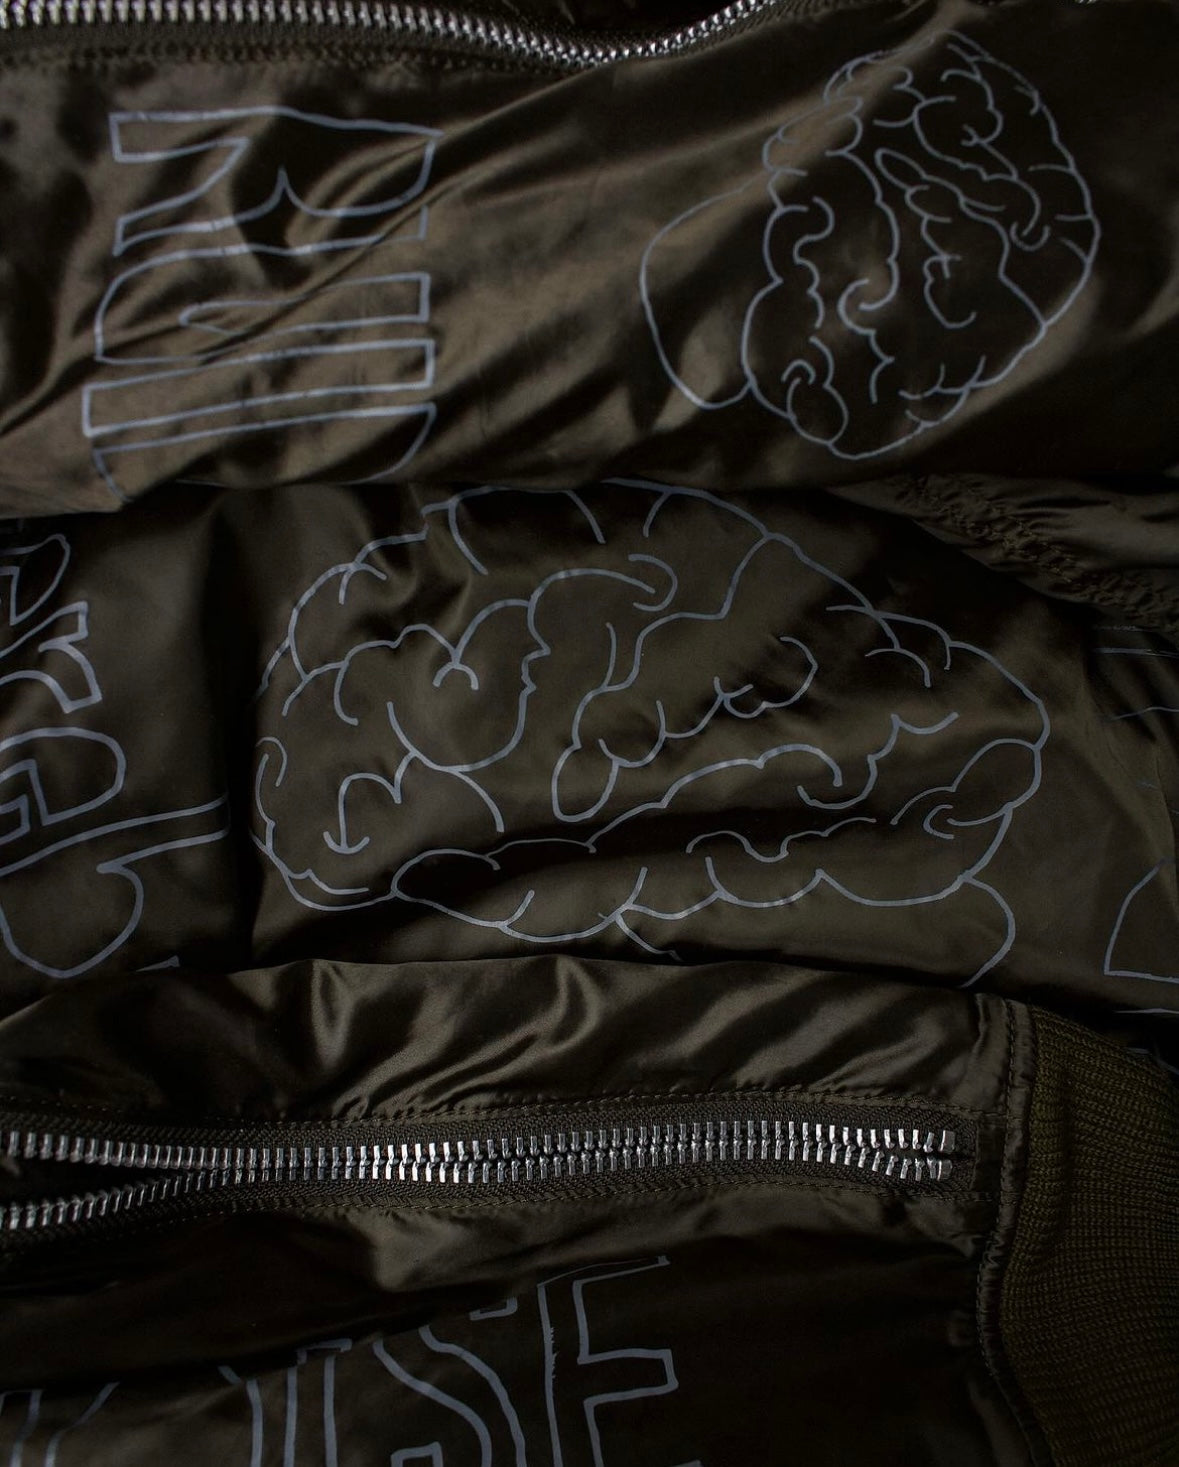 Undercover AW14 “Cerebo” Graphic Back Zip Bomber Jacket